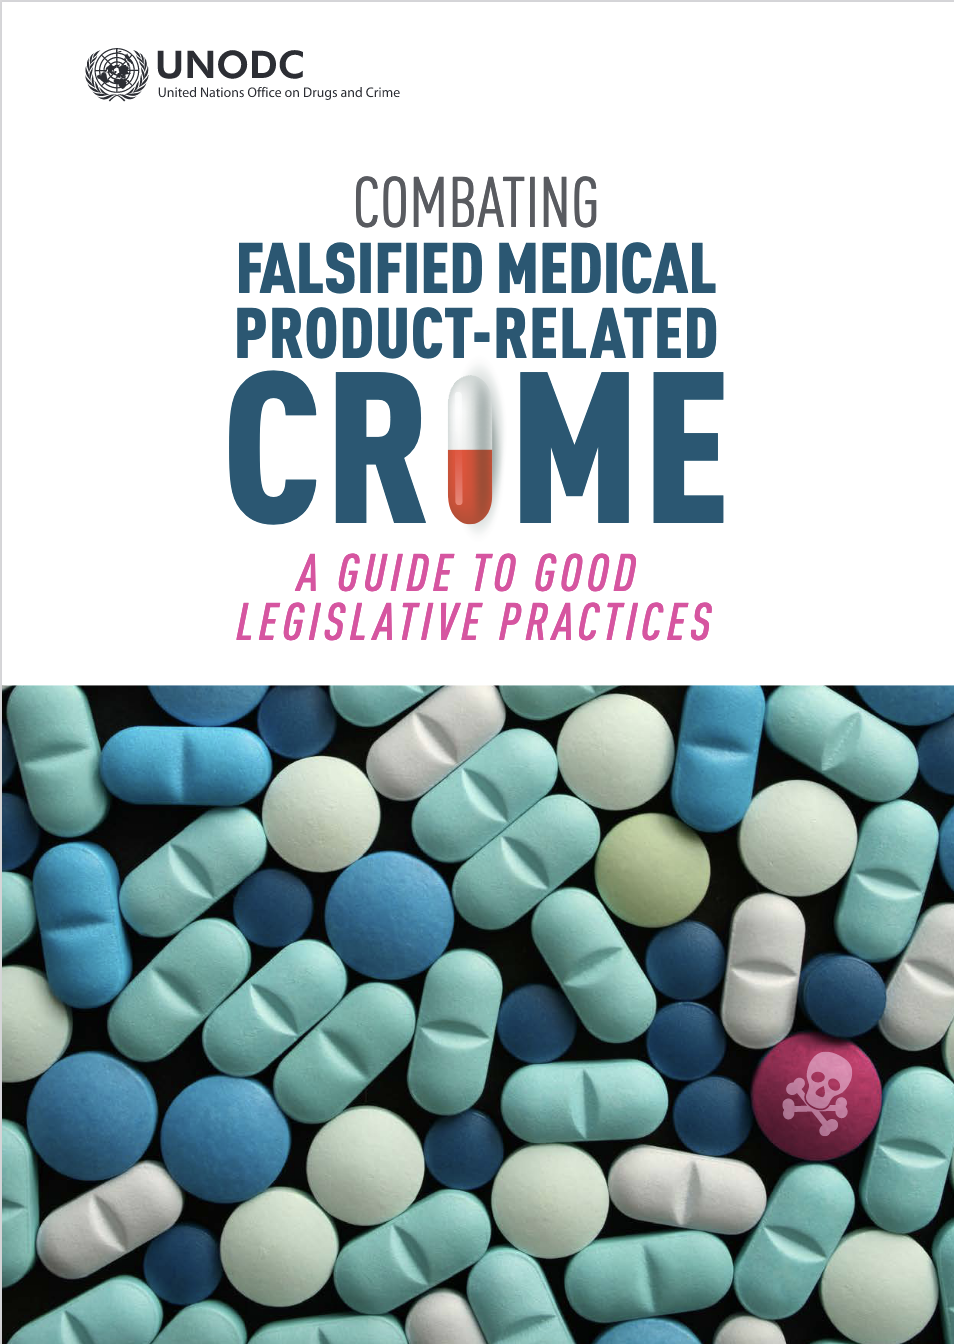 <div style="text-align: center;"> </div>
<div style="text-align: center;">Combating Falsified Medical Product-Related Crime: A Guide to Good Legislative Practices (<a href="https://www.unodc.org/documents/treaties/publications/19-00741_Guide_Falsified_Medical_Products_ebook.pdf">E</a> - <a href="https://www.unodc.org/documents/treaties/publications/19-00742_F_ebook.pdf">F</a>)</div>